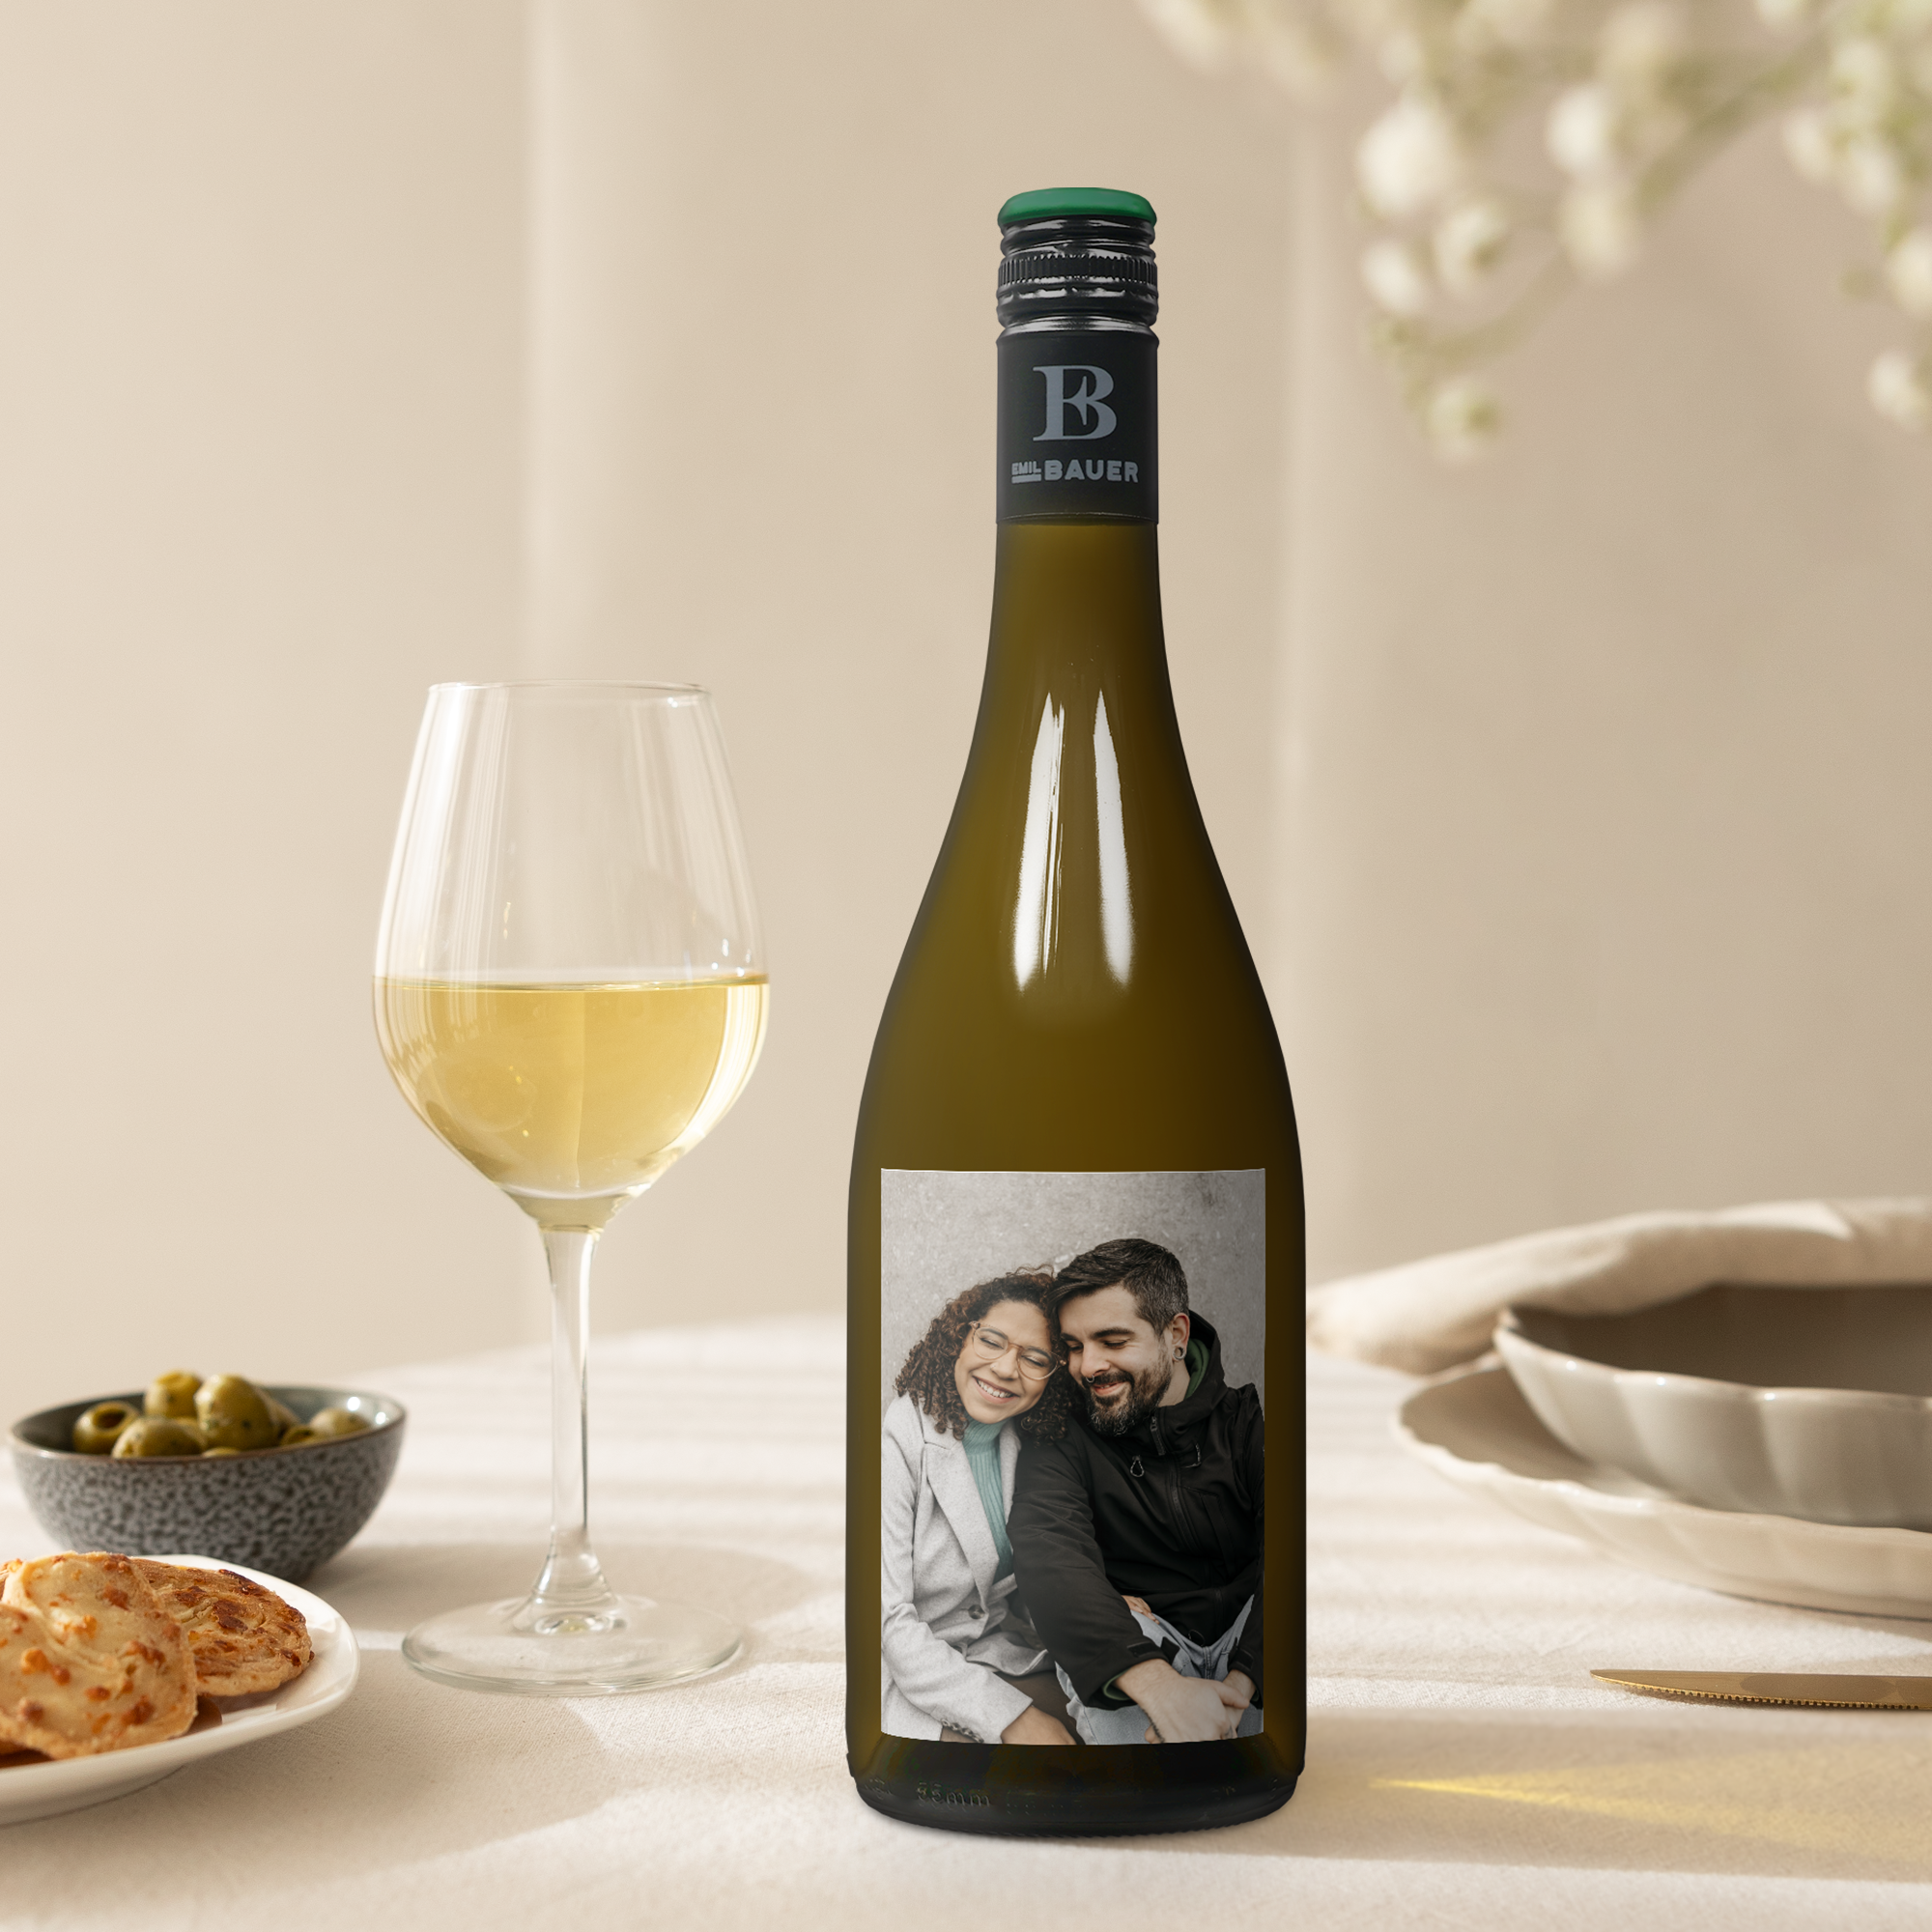 Wine with personalised label - Emil Bauer Burgunder